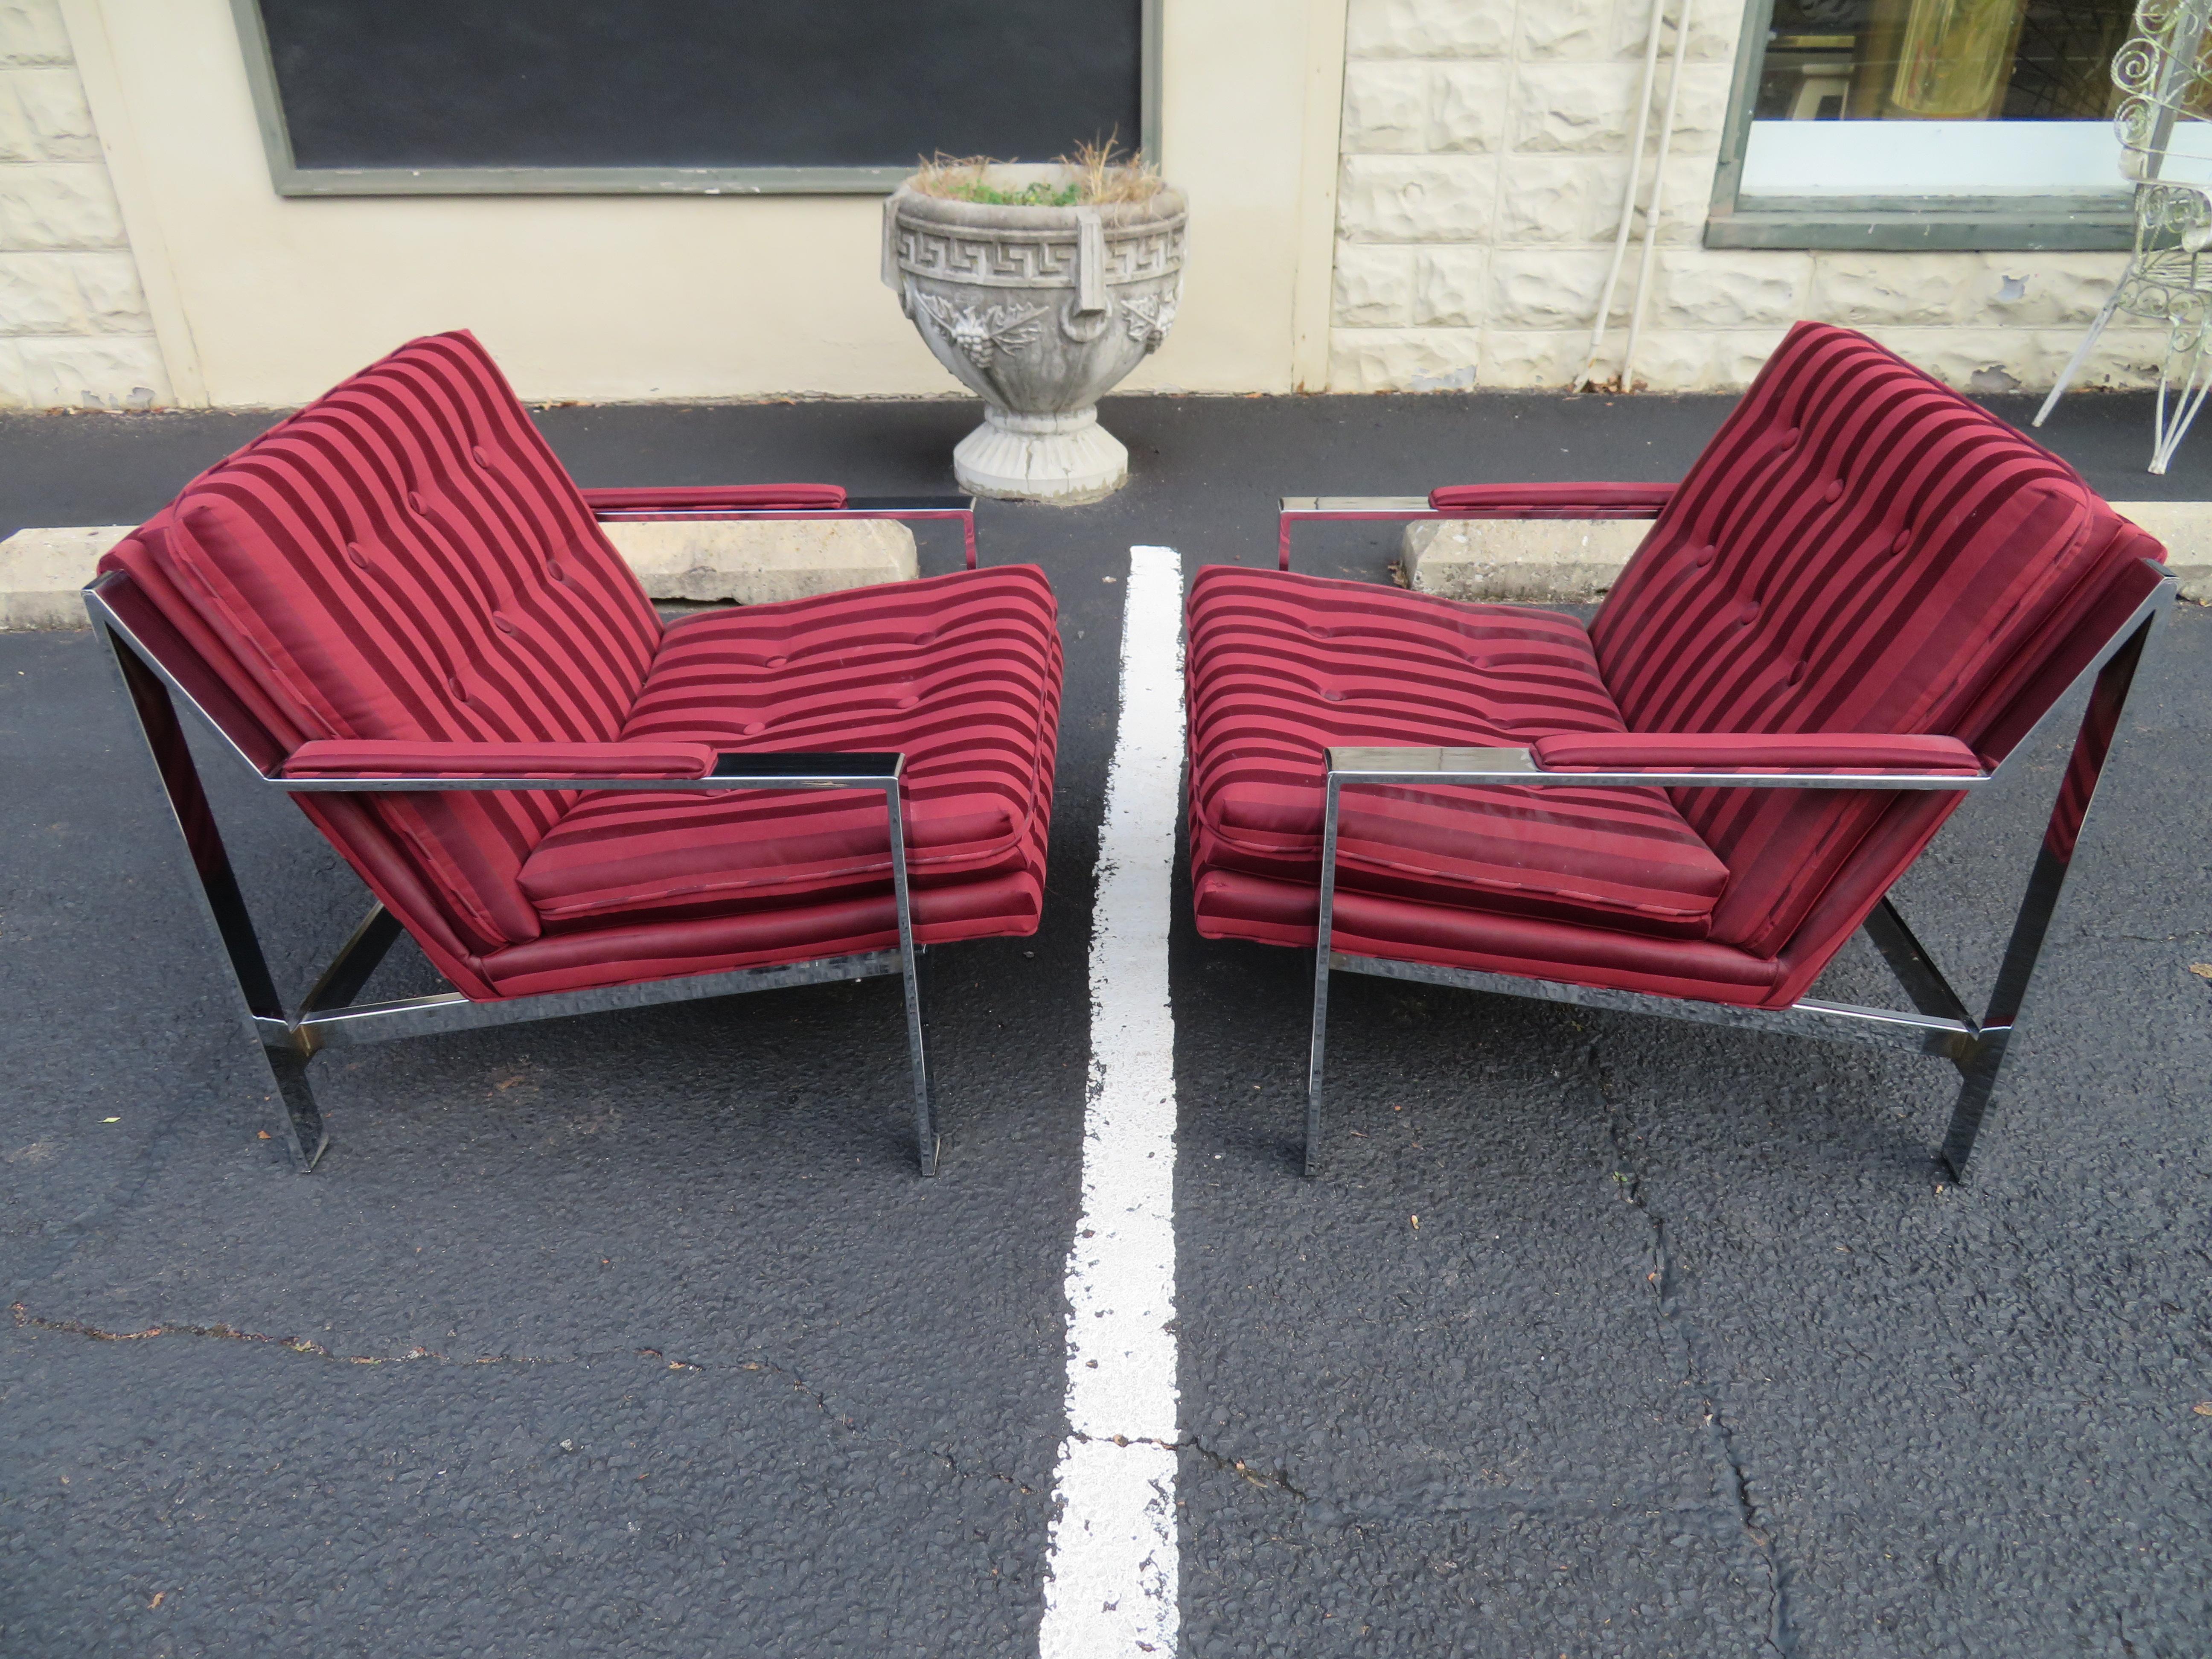 Fantastic pair of Milo Baughman style chrome flat bar lounge chairs. These actually look nice as is but would be best reupholstered. The chrome frames are in very nice vintage condition-very shiny-some minor dings.